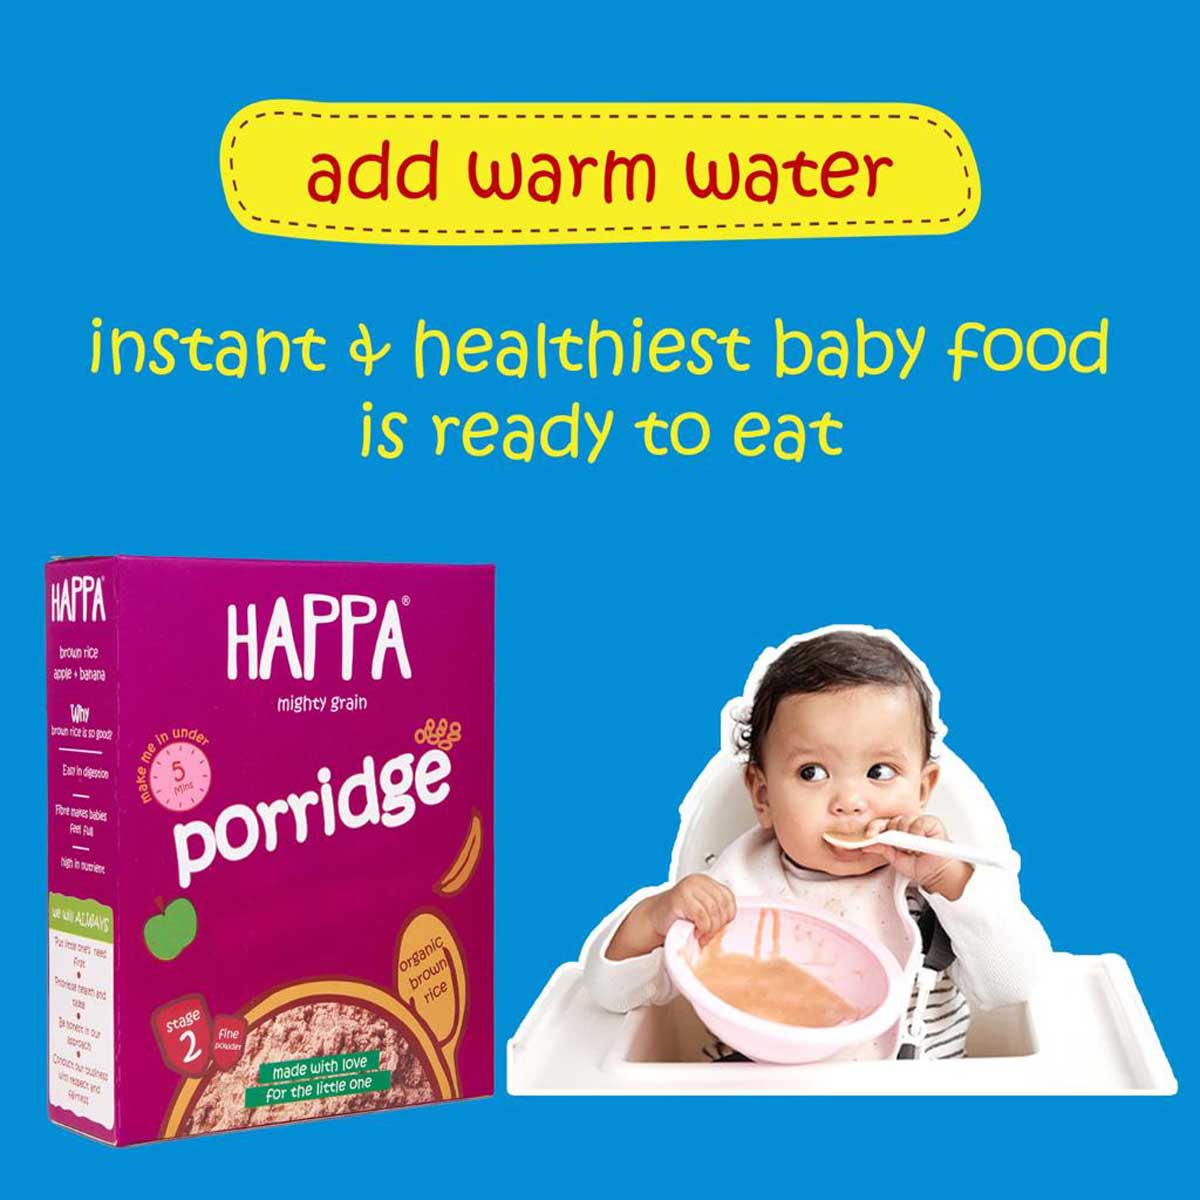 Happafoods high quality infant cereal and formula to support your baby's health and well-being.